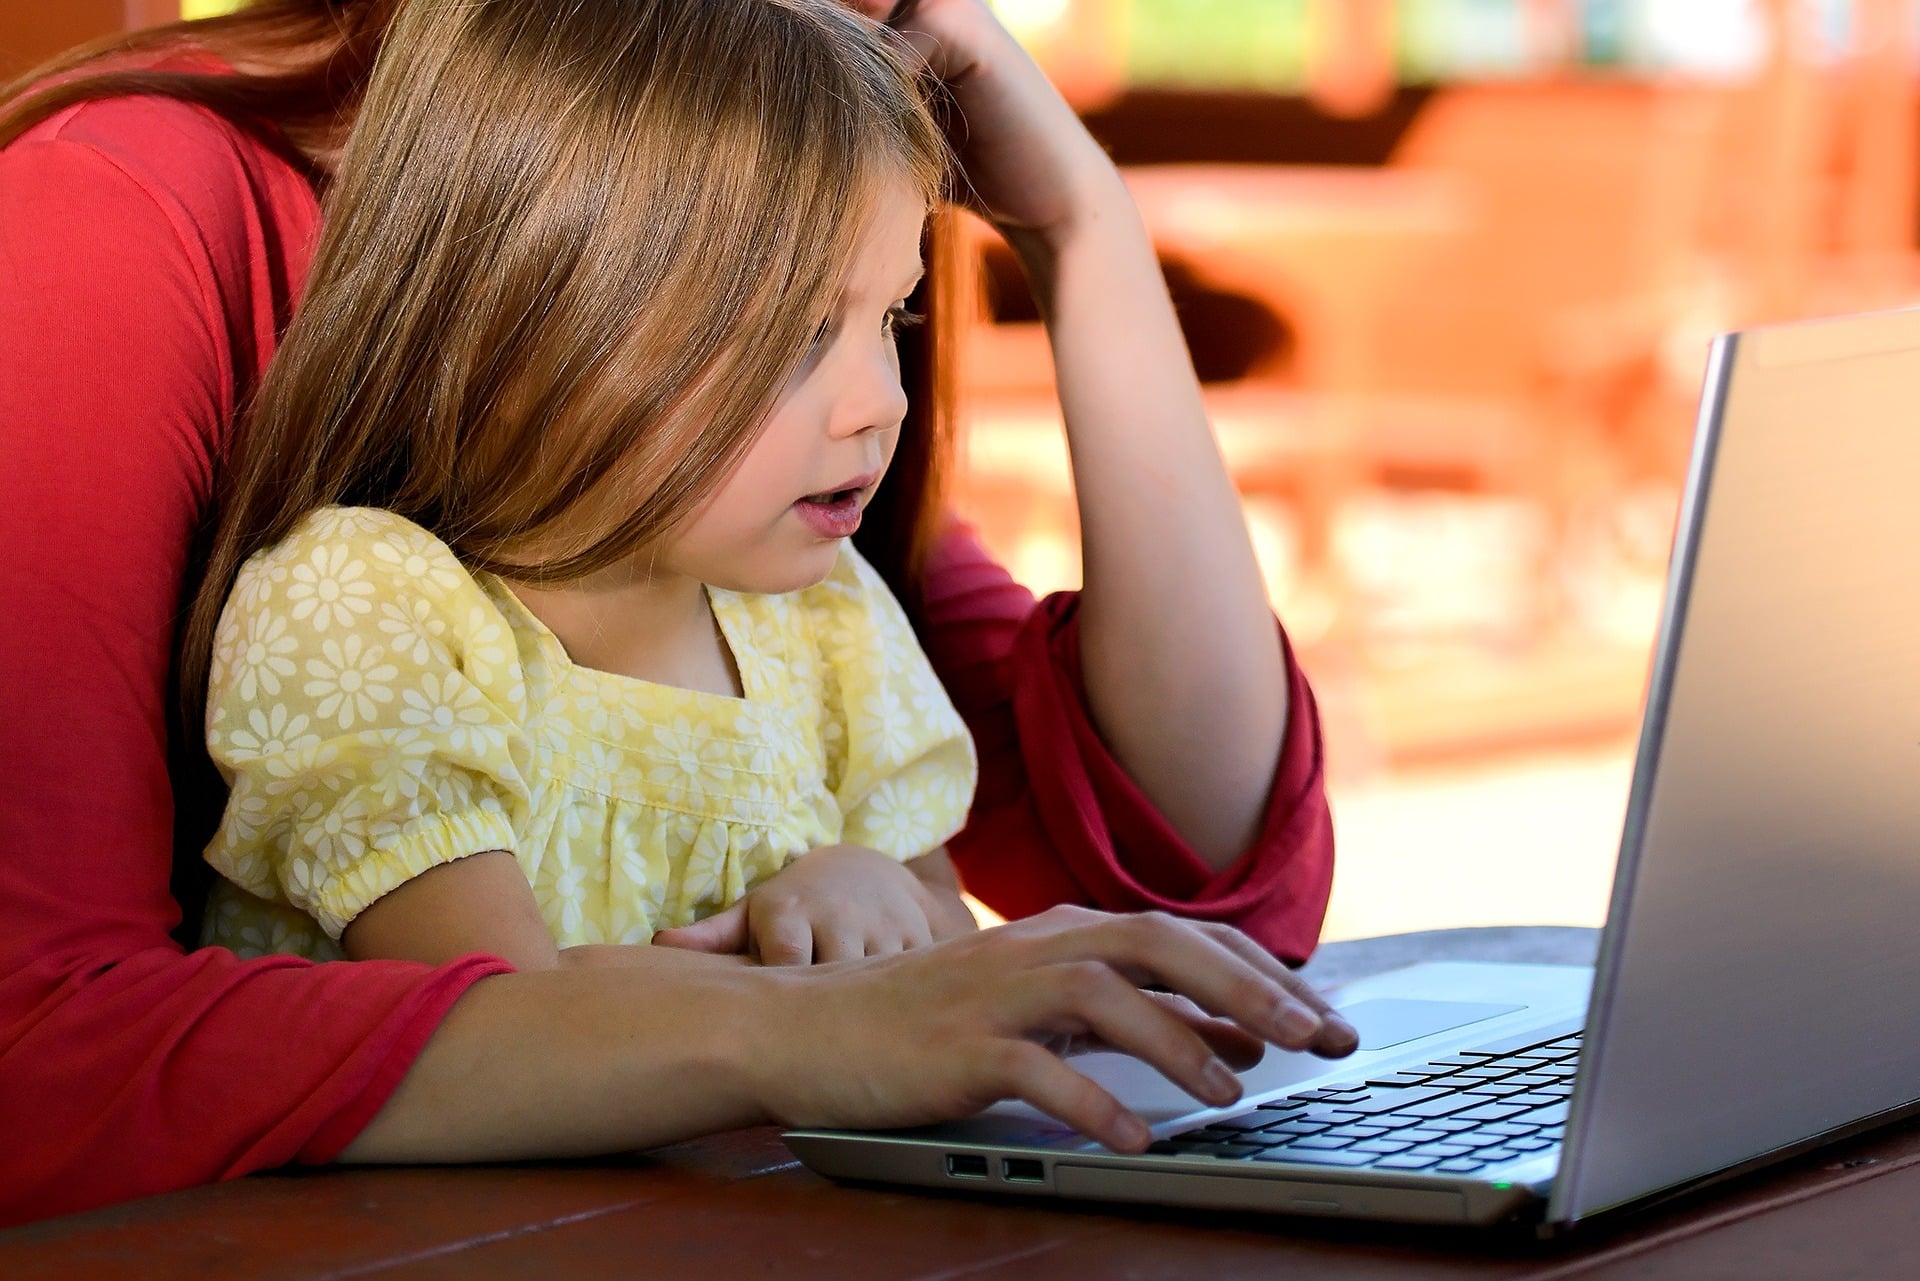 Parents need to start online safety education early, experts say